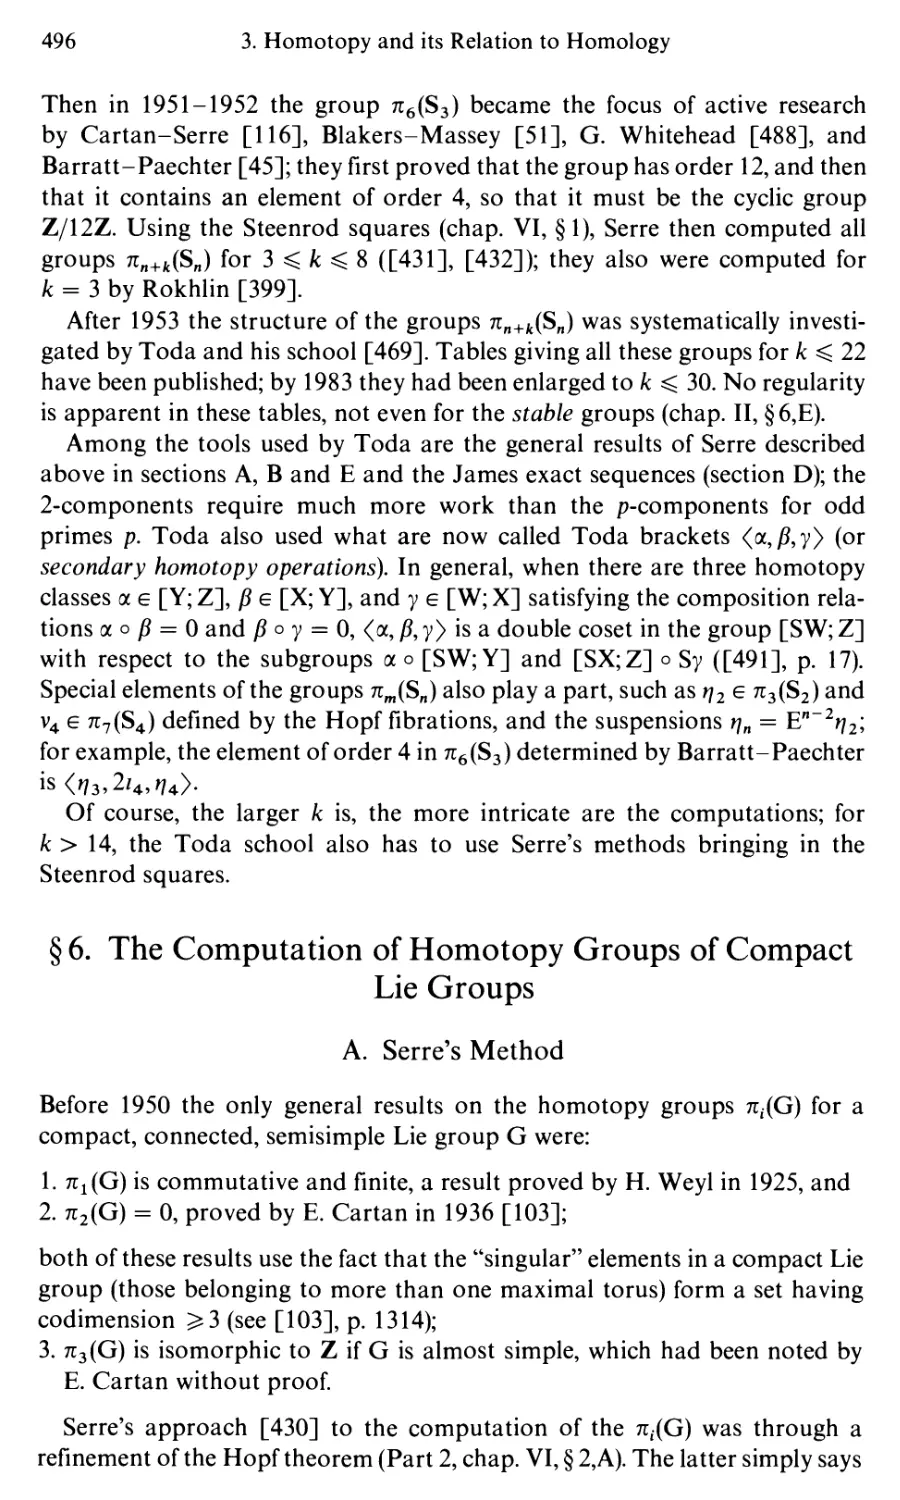 §6. The Computation of Homotopy Groups of Compact Lie Groups